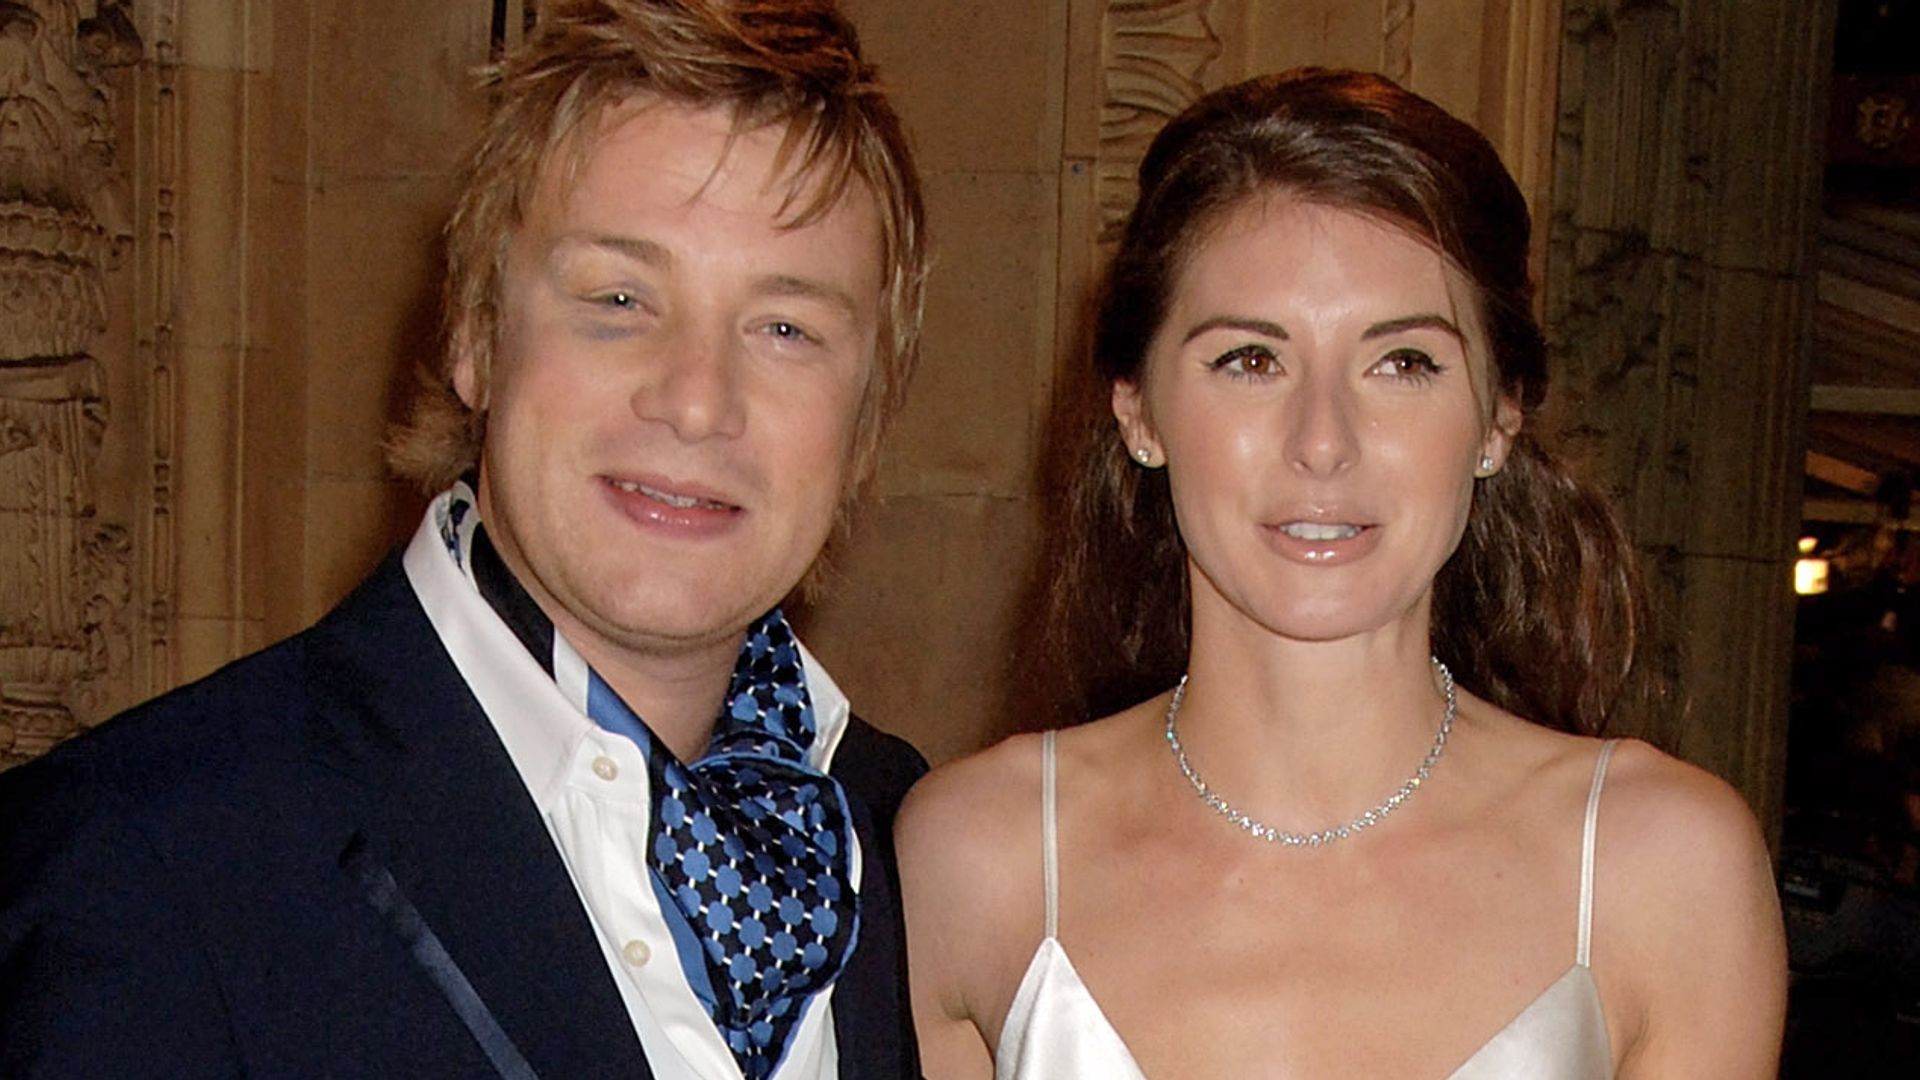 Jamie Oliver says renewing vows with wife Jools in Maldives was 'special,  funny and romantic